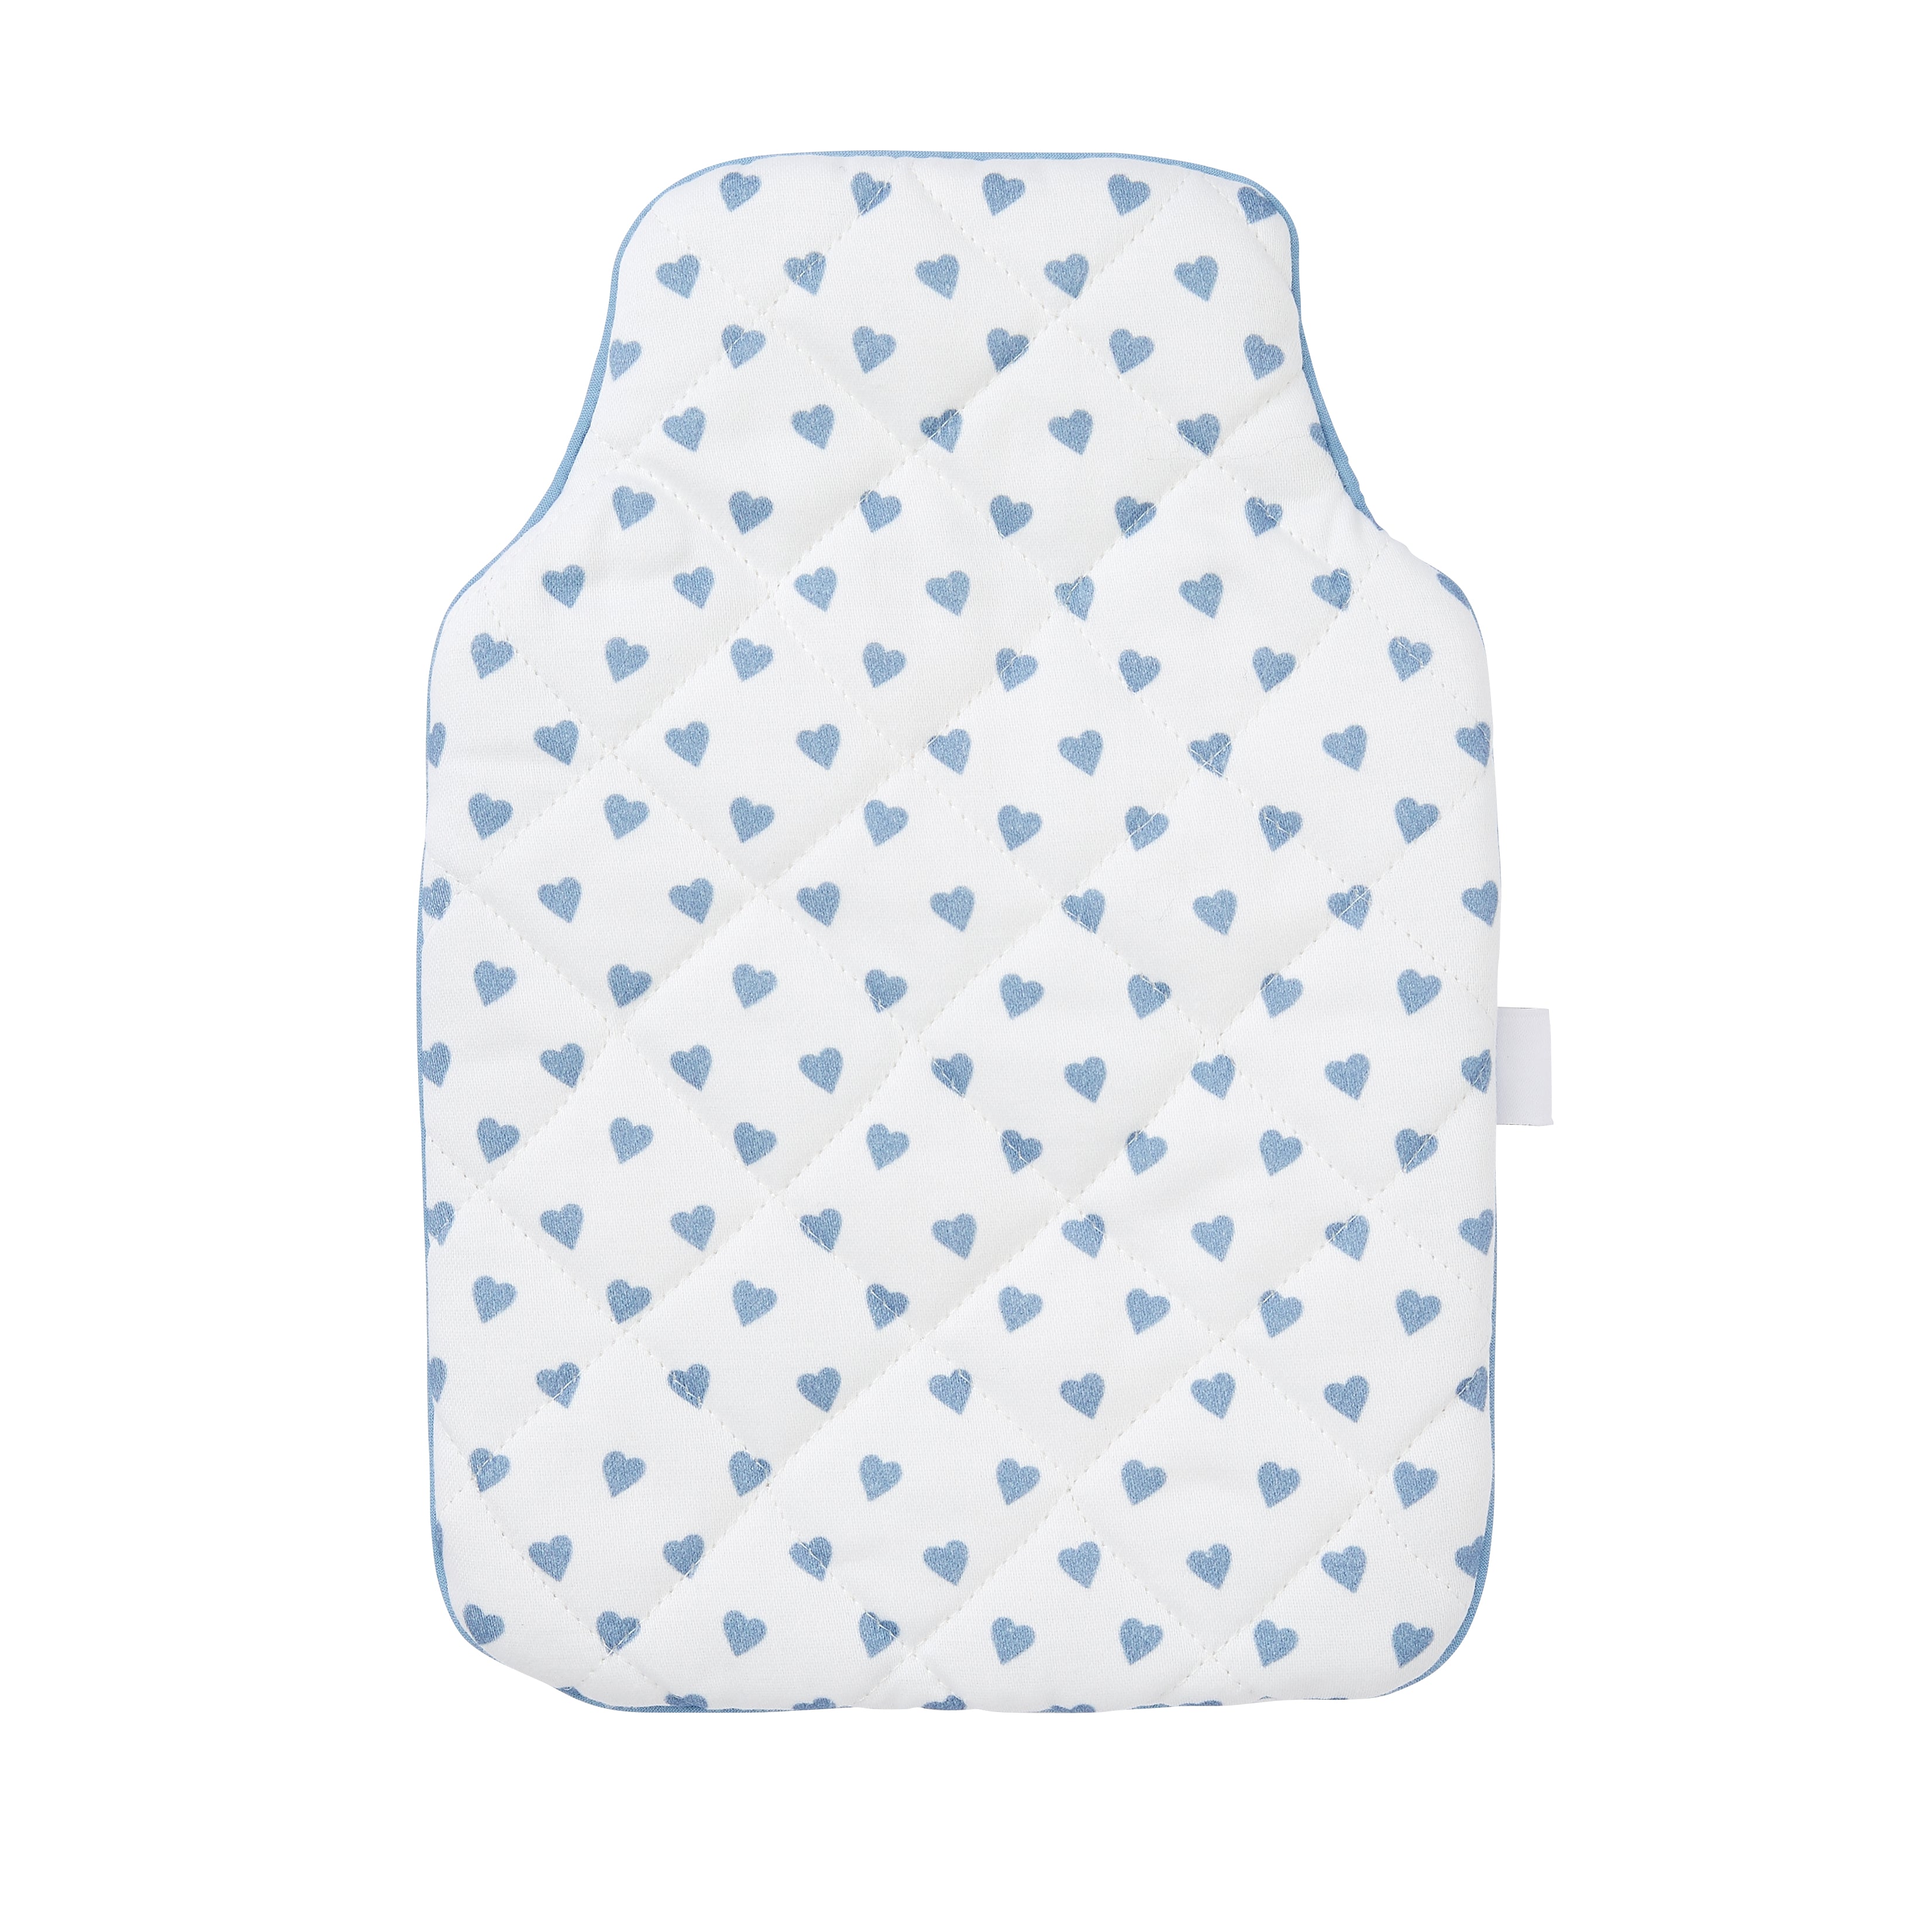 Nina Campbell Mini Hot Water Bottle and Cover - Blue Heart